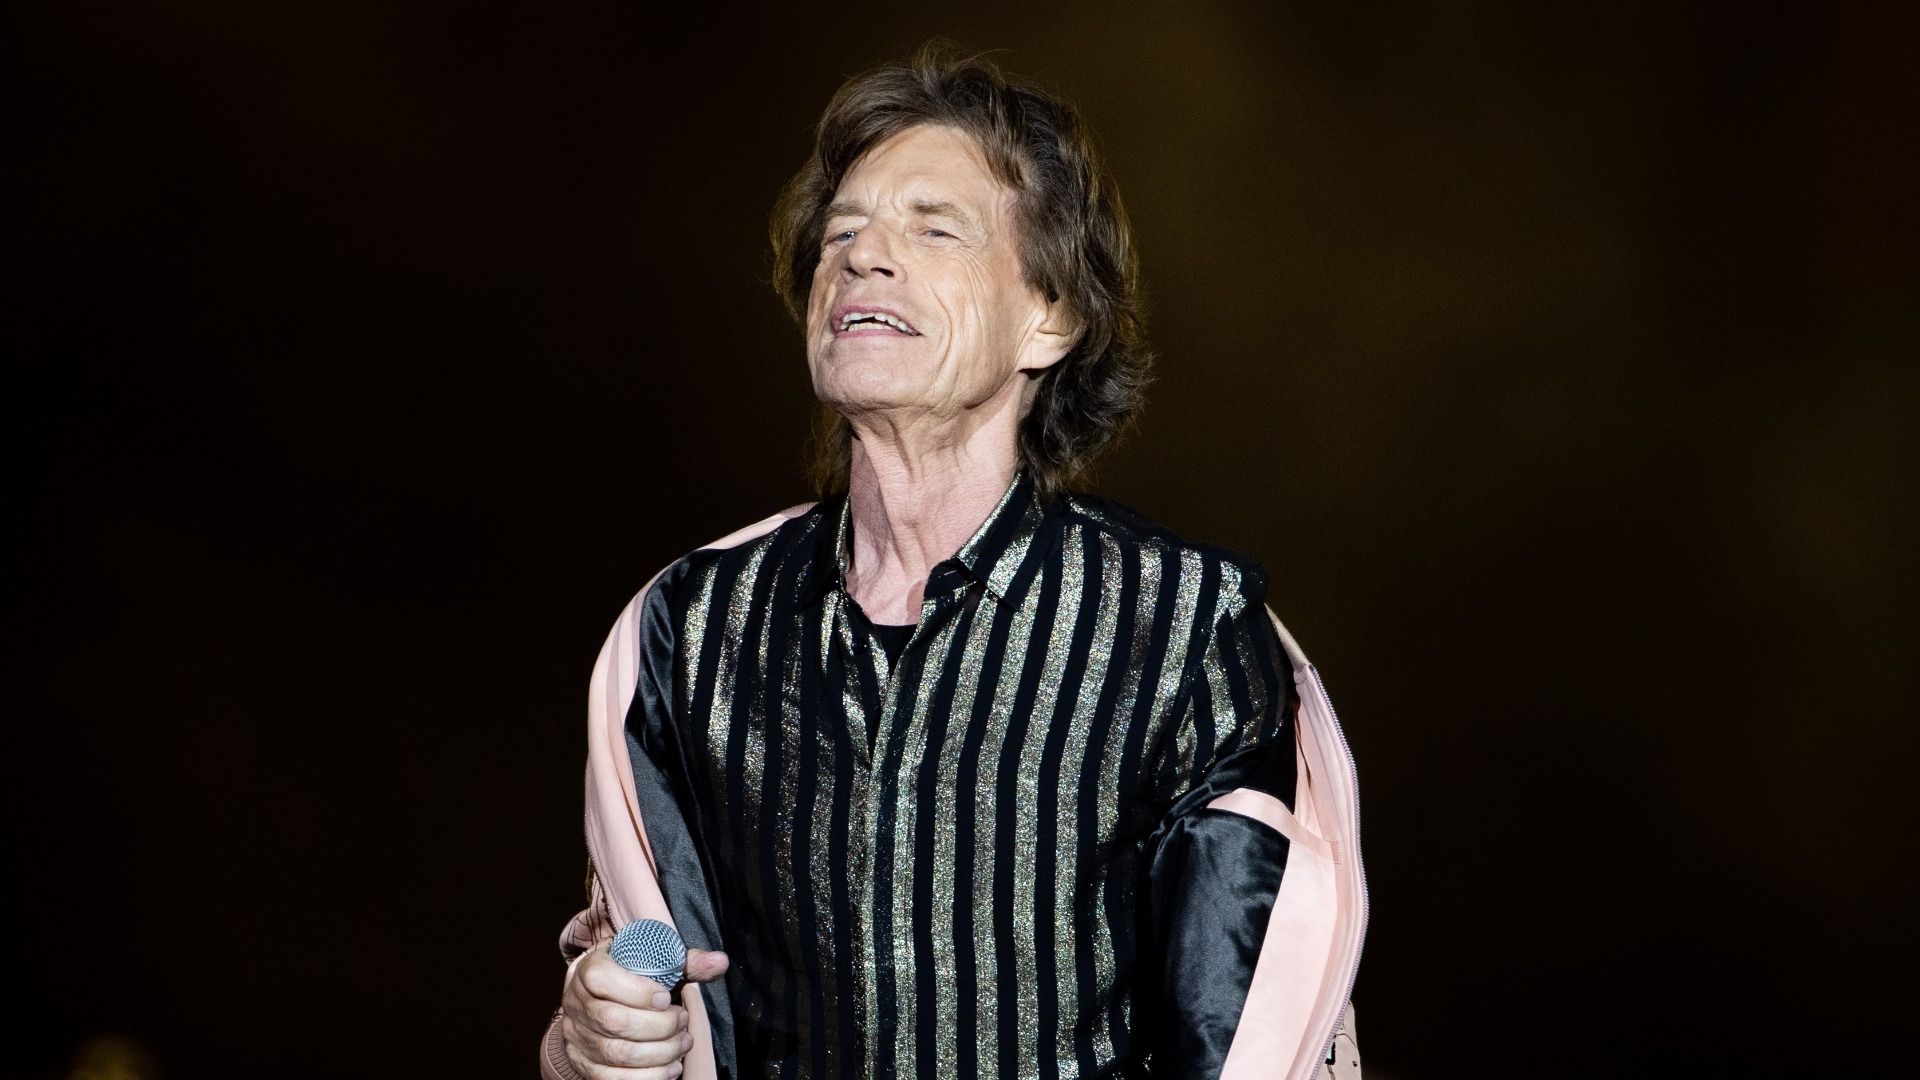 Mick Jagger says he’s “feeling much better” after COVID-19 diagnosis